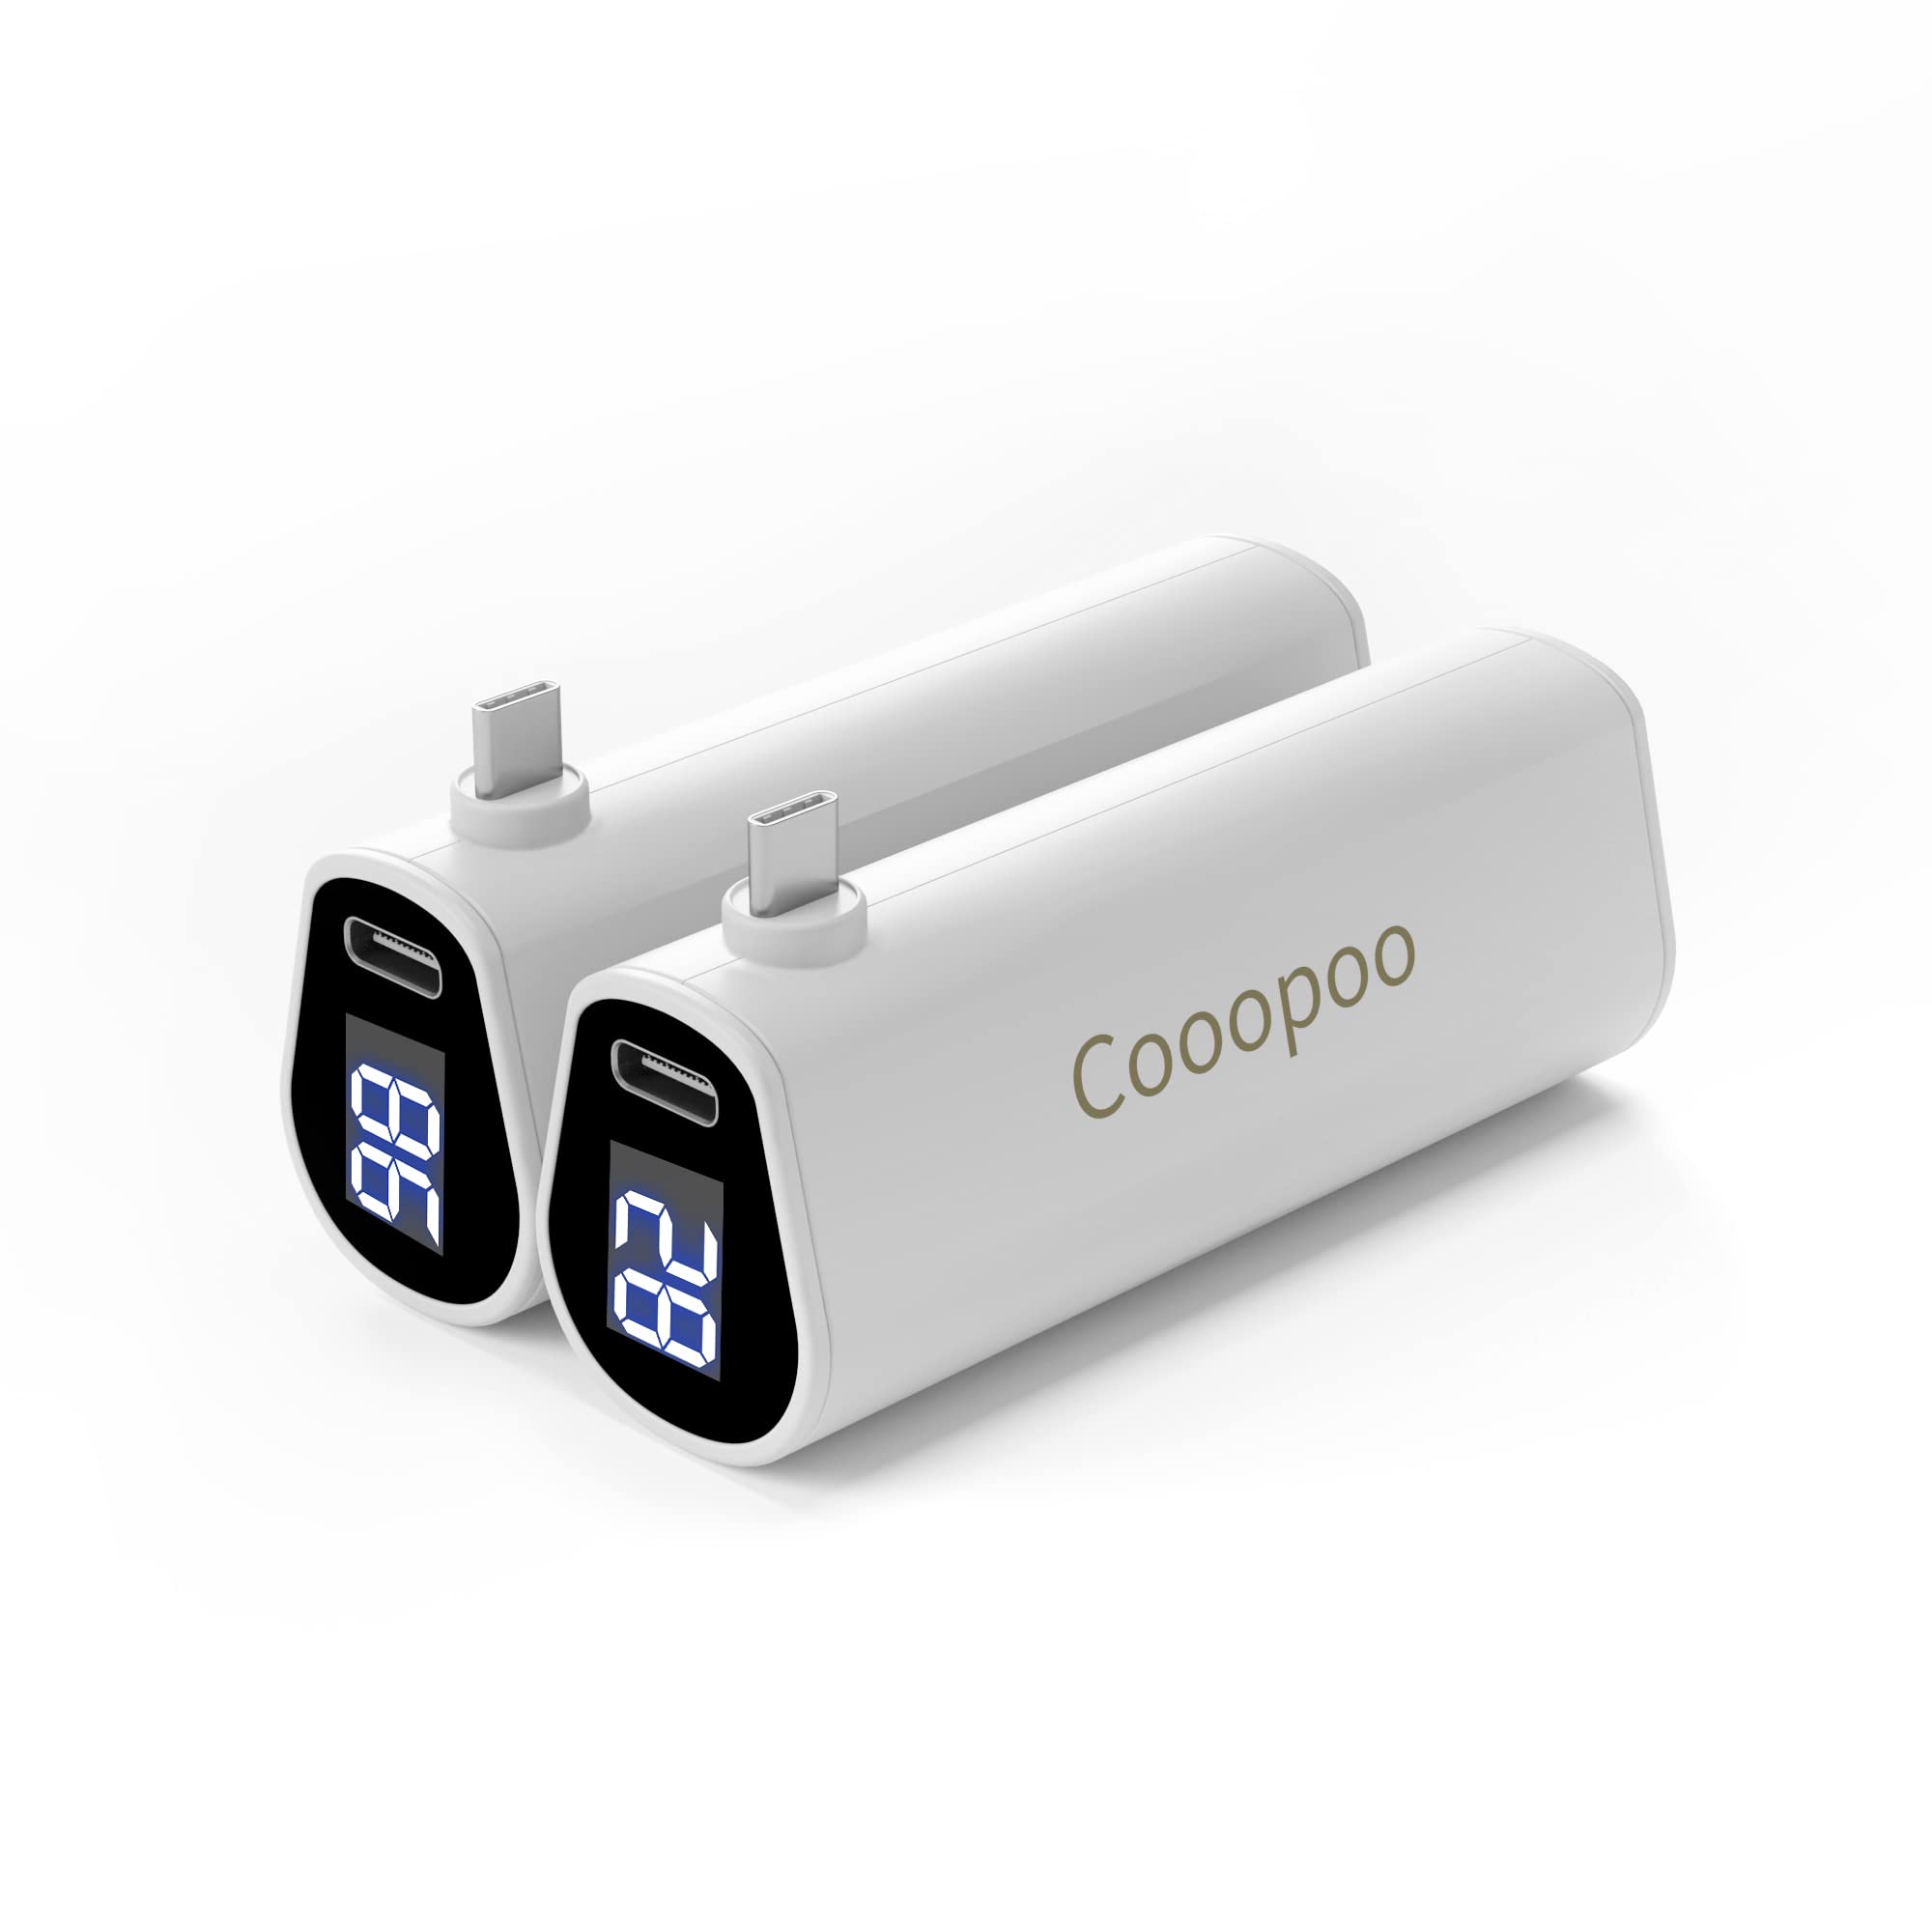 5000mAh 5V3A Fast Charge Battery Pack for Quest 3 / Quest 2 - Lightweight Power Bank with LCD Indicator for Extended Playtime - Rechargeable Mini Accessory with Power Indicator [2Pack]